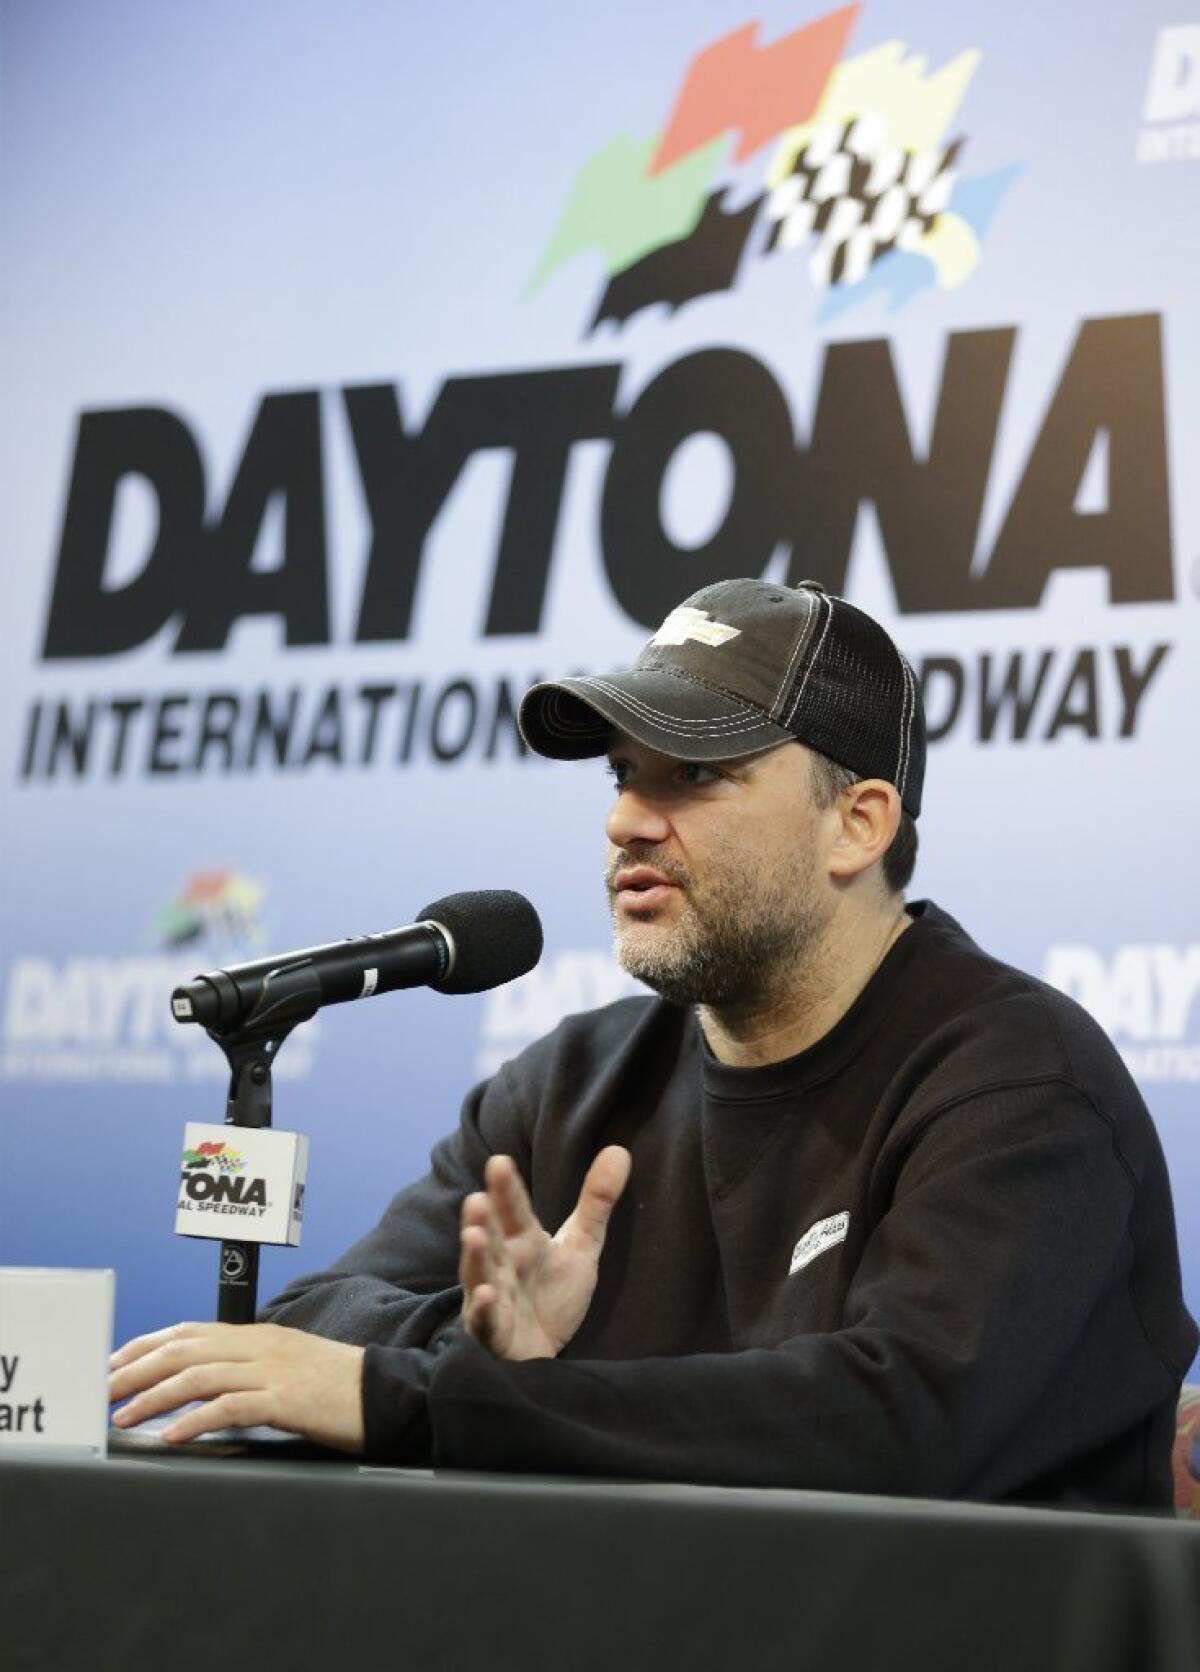 NASCAR driver Tony Stewart said at a news conference at Daytona International Speedway that he would be ready for the Daytona 500 next month.